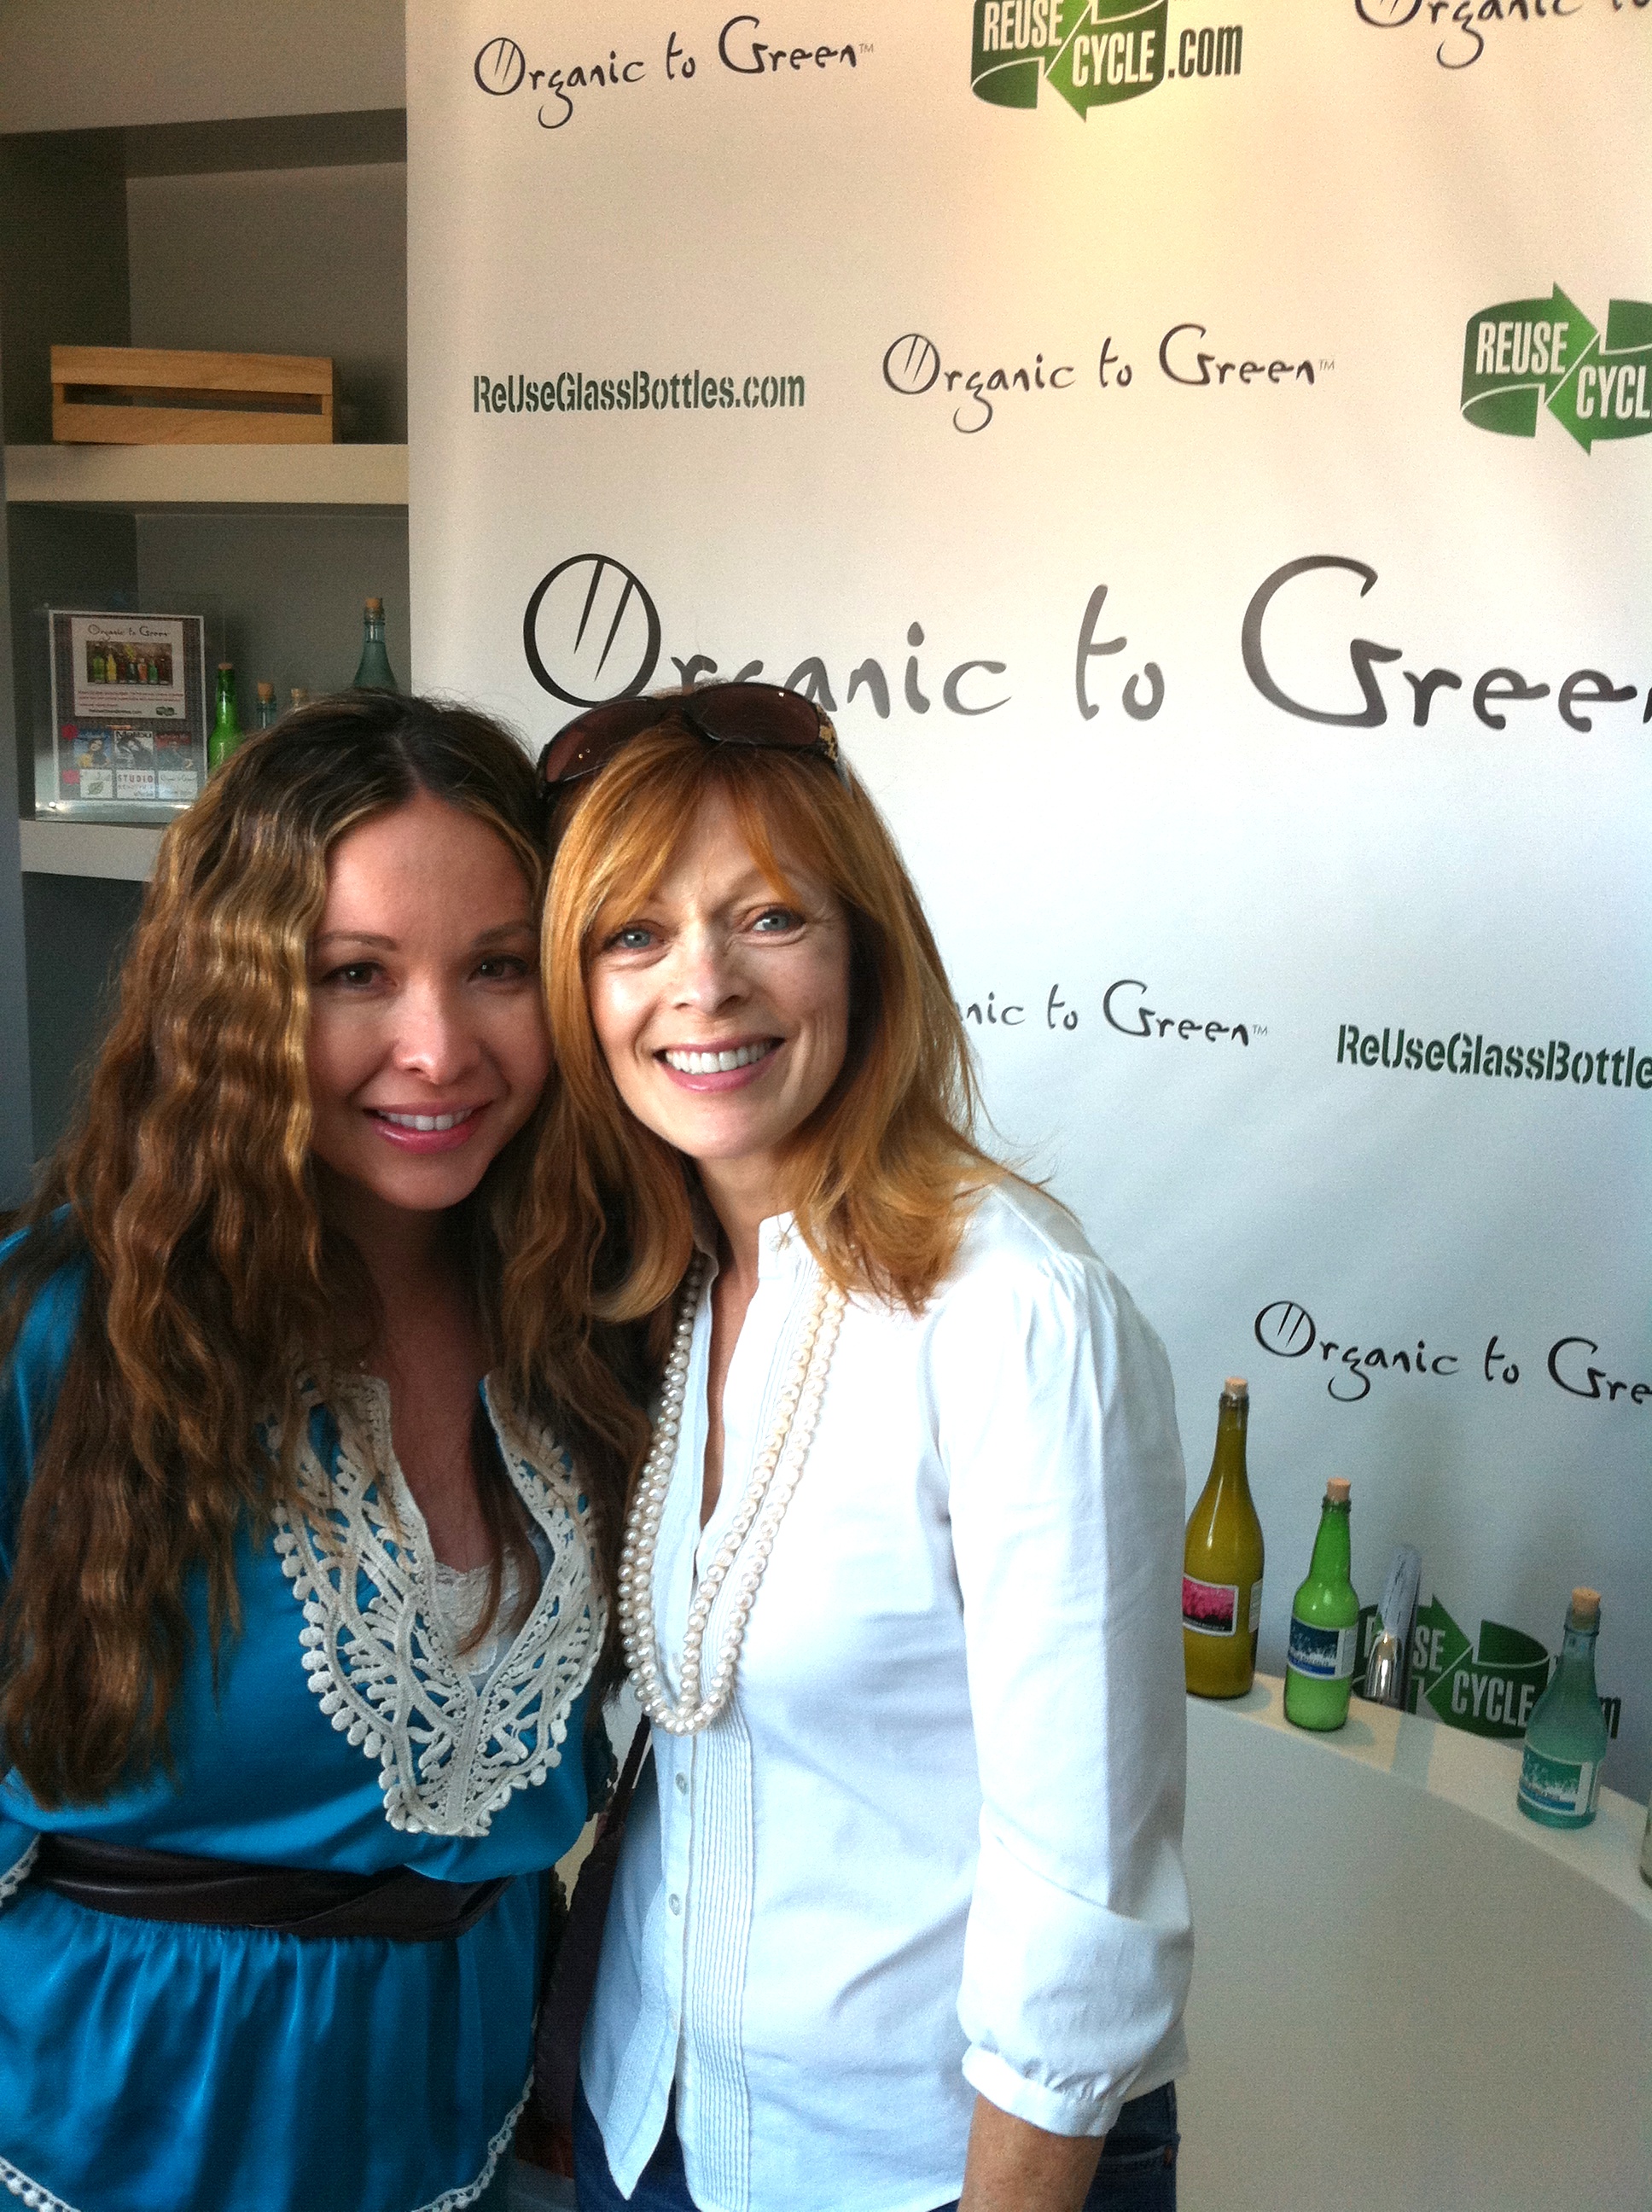 Rianna Loving, reusing and green advocate and founder of Organic To Green, and Francis Fisher at the Eco Emmy Event.